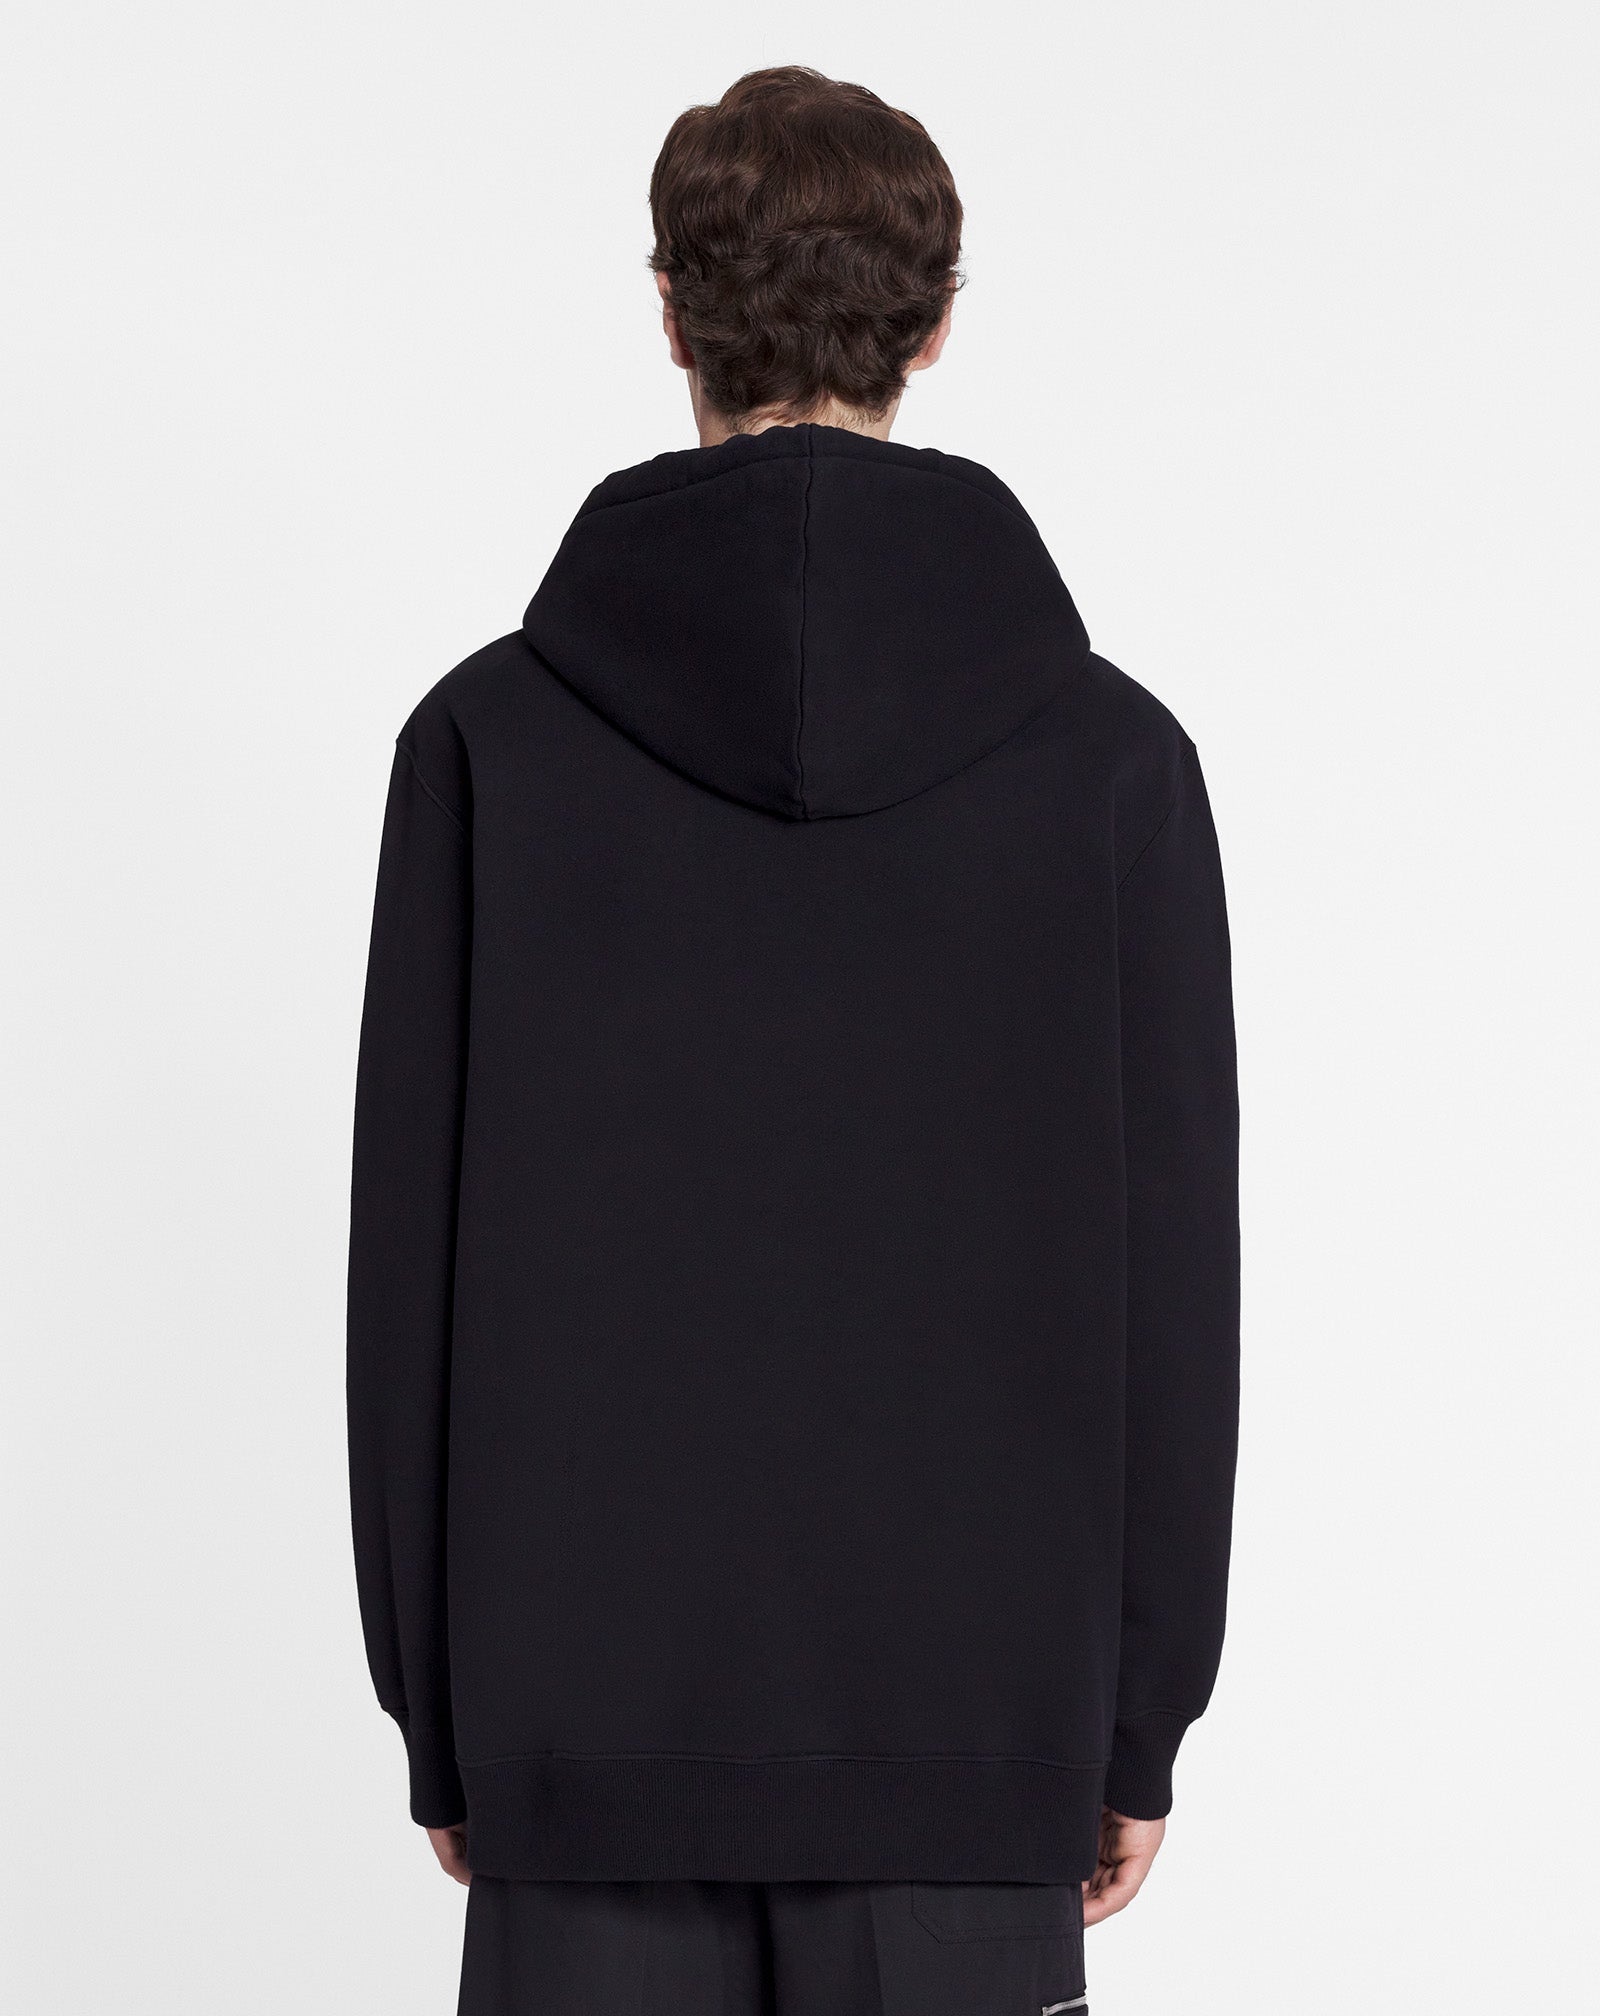 LOOSE-FITTING HOODIE WITH LANVIN LOGO - 6